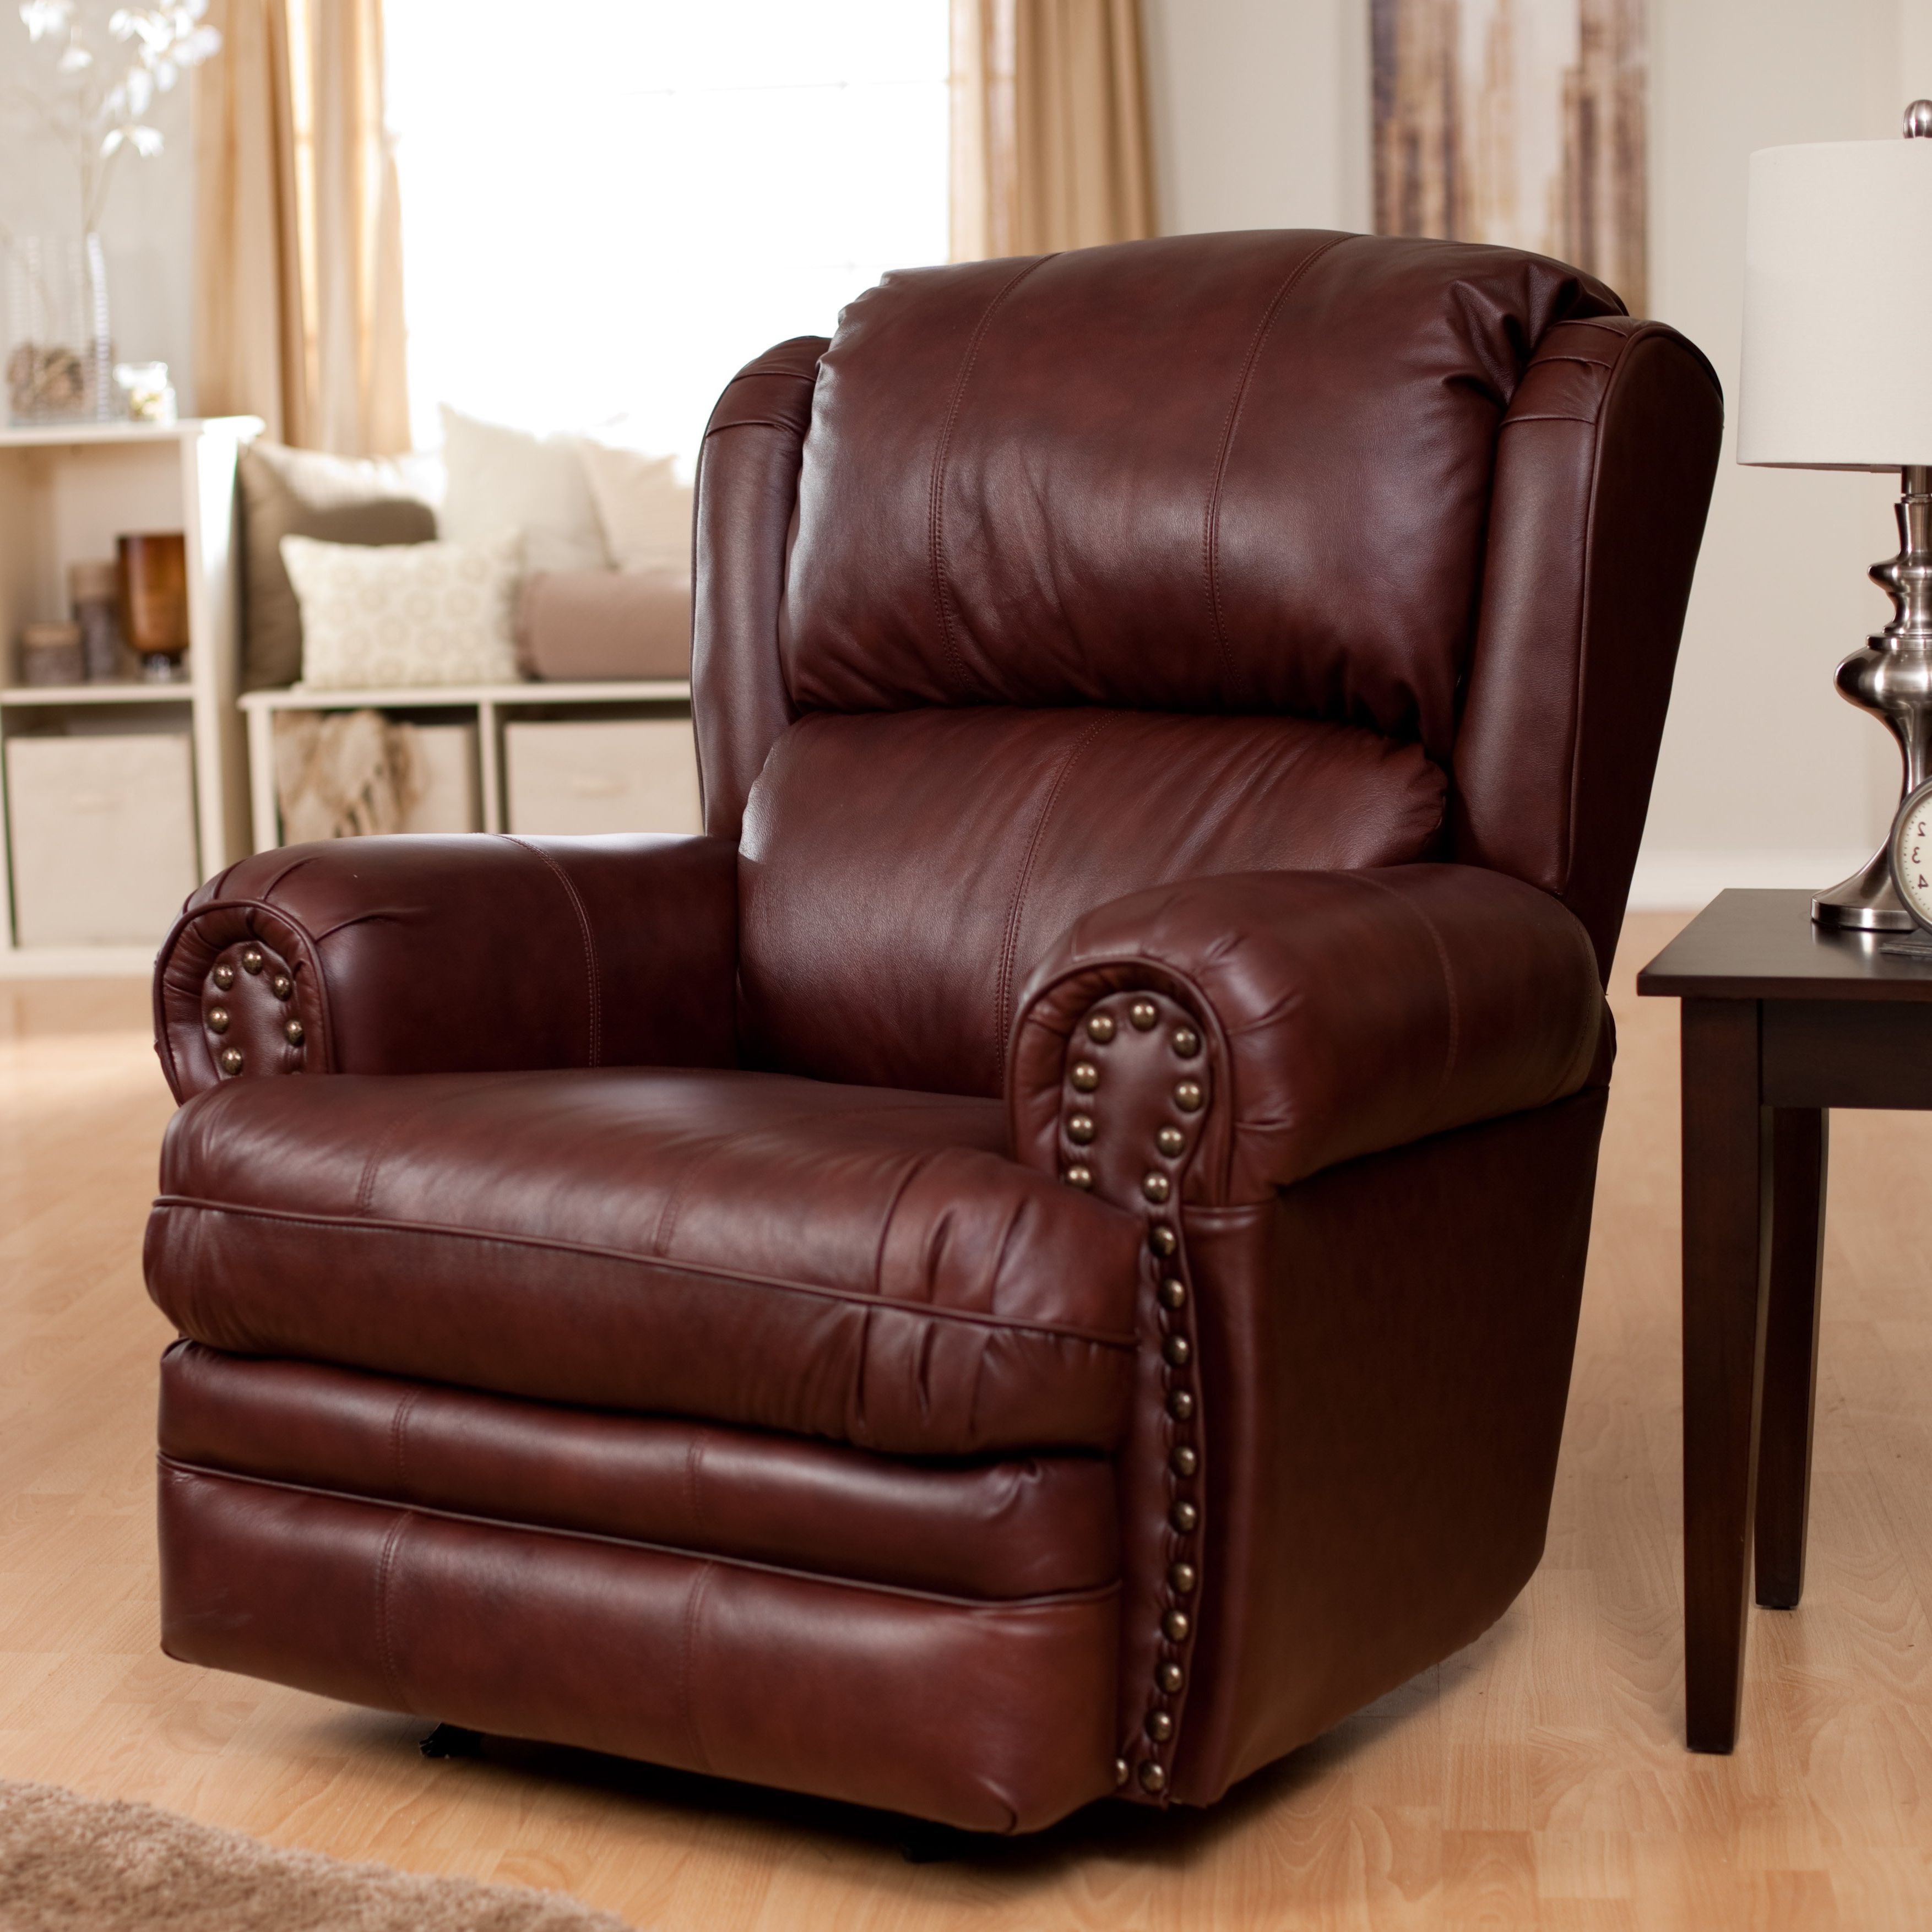 Rogan Leather Cafe Latte Swivel Glider Recliners Regarding Newest Furniture: Surprising Simmons Recliners For Contemporary Living Room (View 10 of 20)